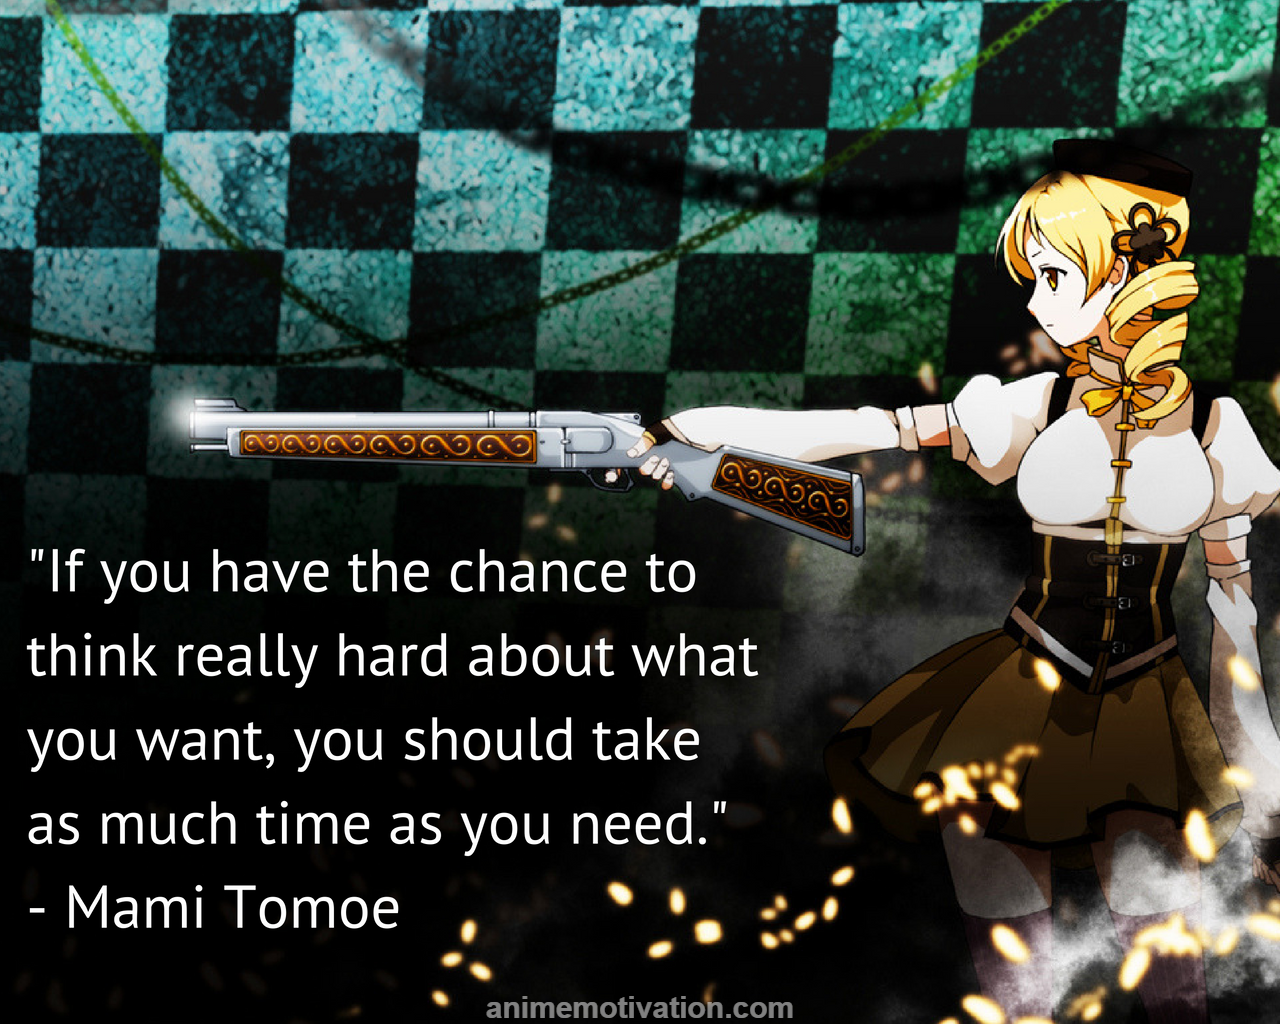 Mami Tomoe quotes. Wallpaper quotes, Inspirational quotes wallpaper, Positive quotes wallpaper